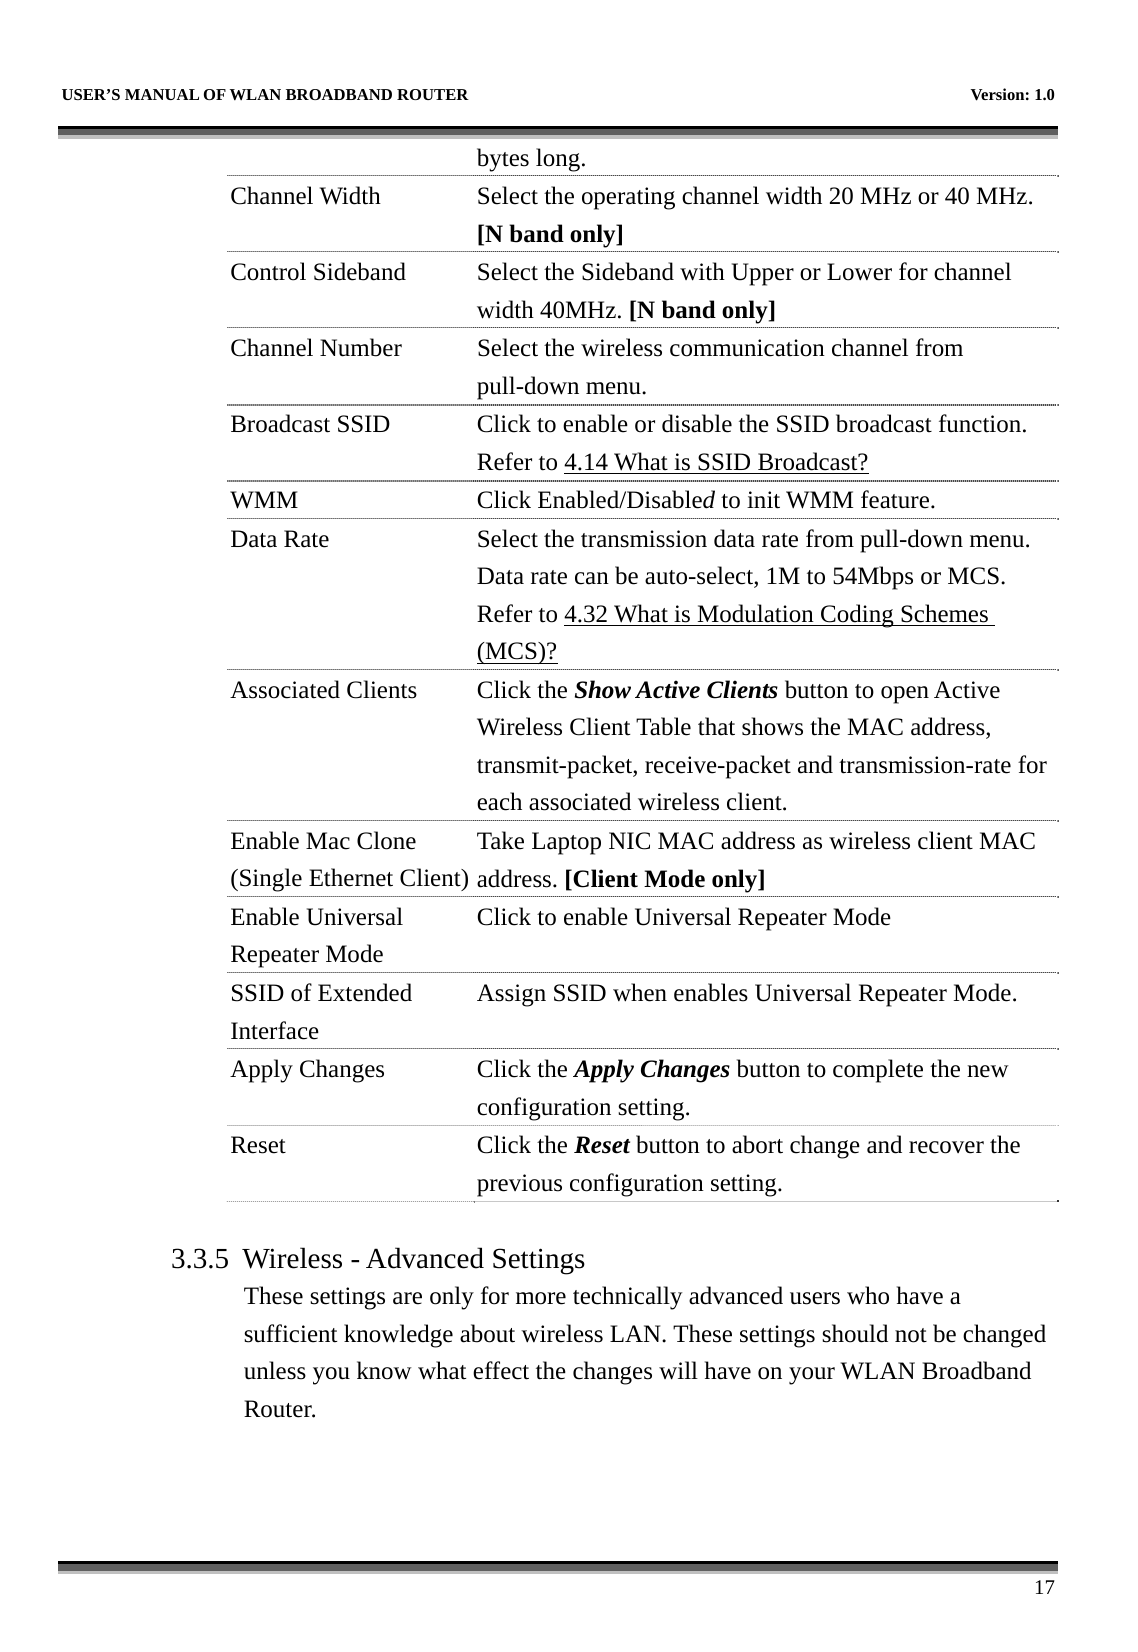   USER’S MANUAL OF WLAN BROADBAND ROUTER    Version: 1.0      17 bytes long. Channel Width  Select the operating channel width 20 MHz or 40 MHz. [N band only] Control Sideband  Select the Sideband with Upper or Lower for channel width 40MHz. [N band only] Channel Number  Select the wireless communication channel from pull-down menu. Broadcast SSID  Click to enable or disable the SSID broadcast function. Refer to 4.14 What is SSID Broadcast? WMM Click Enabled/Disabled to init WMM feature. Data Rate  Select the transmission data rate from pull-down menu. Data rate can be auto-select, 1M to 54Mbps or MCS. Refer to 4.32 What is Modulation Coding Schemes (MCS)? Associated Clients  Click the Show Active Clients button to open Active Wireless Client Table that shows the MAC address, transmit-packet, receive-packet and transmission-rate for each associated wireless client. Enable Mac Clone (Single Ethernet Client)Take Laptop NIC MAC address as wireless client MAC address. [Client Mode only] Enable Universal Repeater Mode Click to enable Universal Repeater Mode SSID of Extended Interface Assign SSID when enables Universal Repeater Mode. Apply Changes  Click the Apply Changes button to complete the new configuration setting. Reset Click the Reset button to abort change and recover the previous configuration setting.  3.3.5 Wireless - Advanced Settings These settings are only for more technically advanced users who have a sufficient knowledge about wireless LAN. These settings should not be changed unless you know what effect the changes will have on your WLAN Broadband Router.  